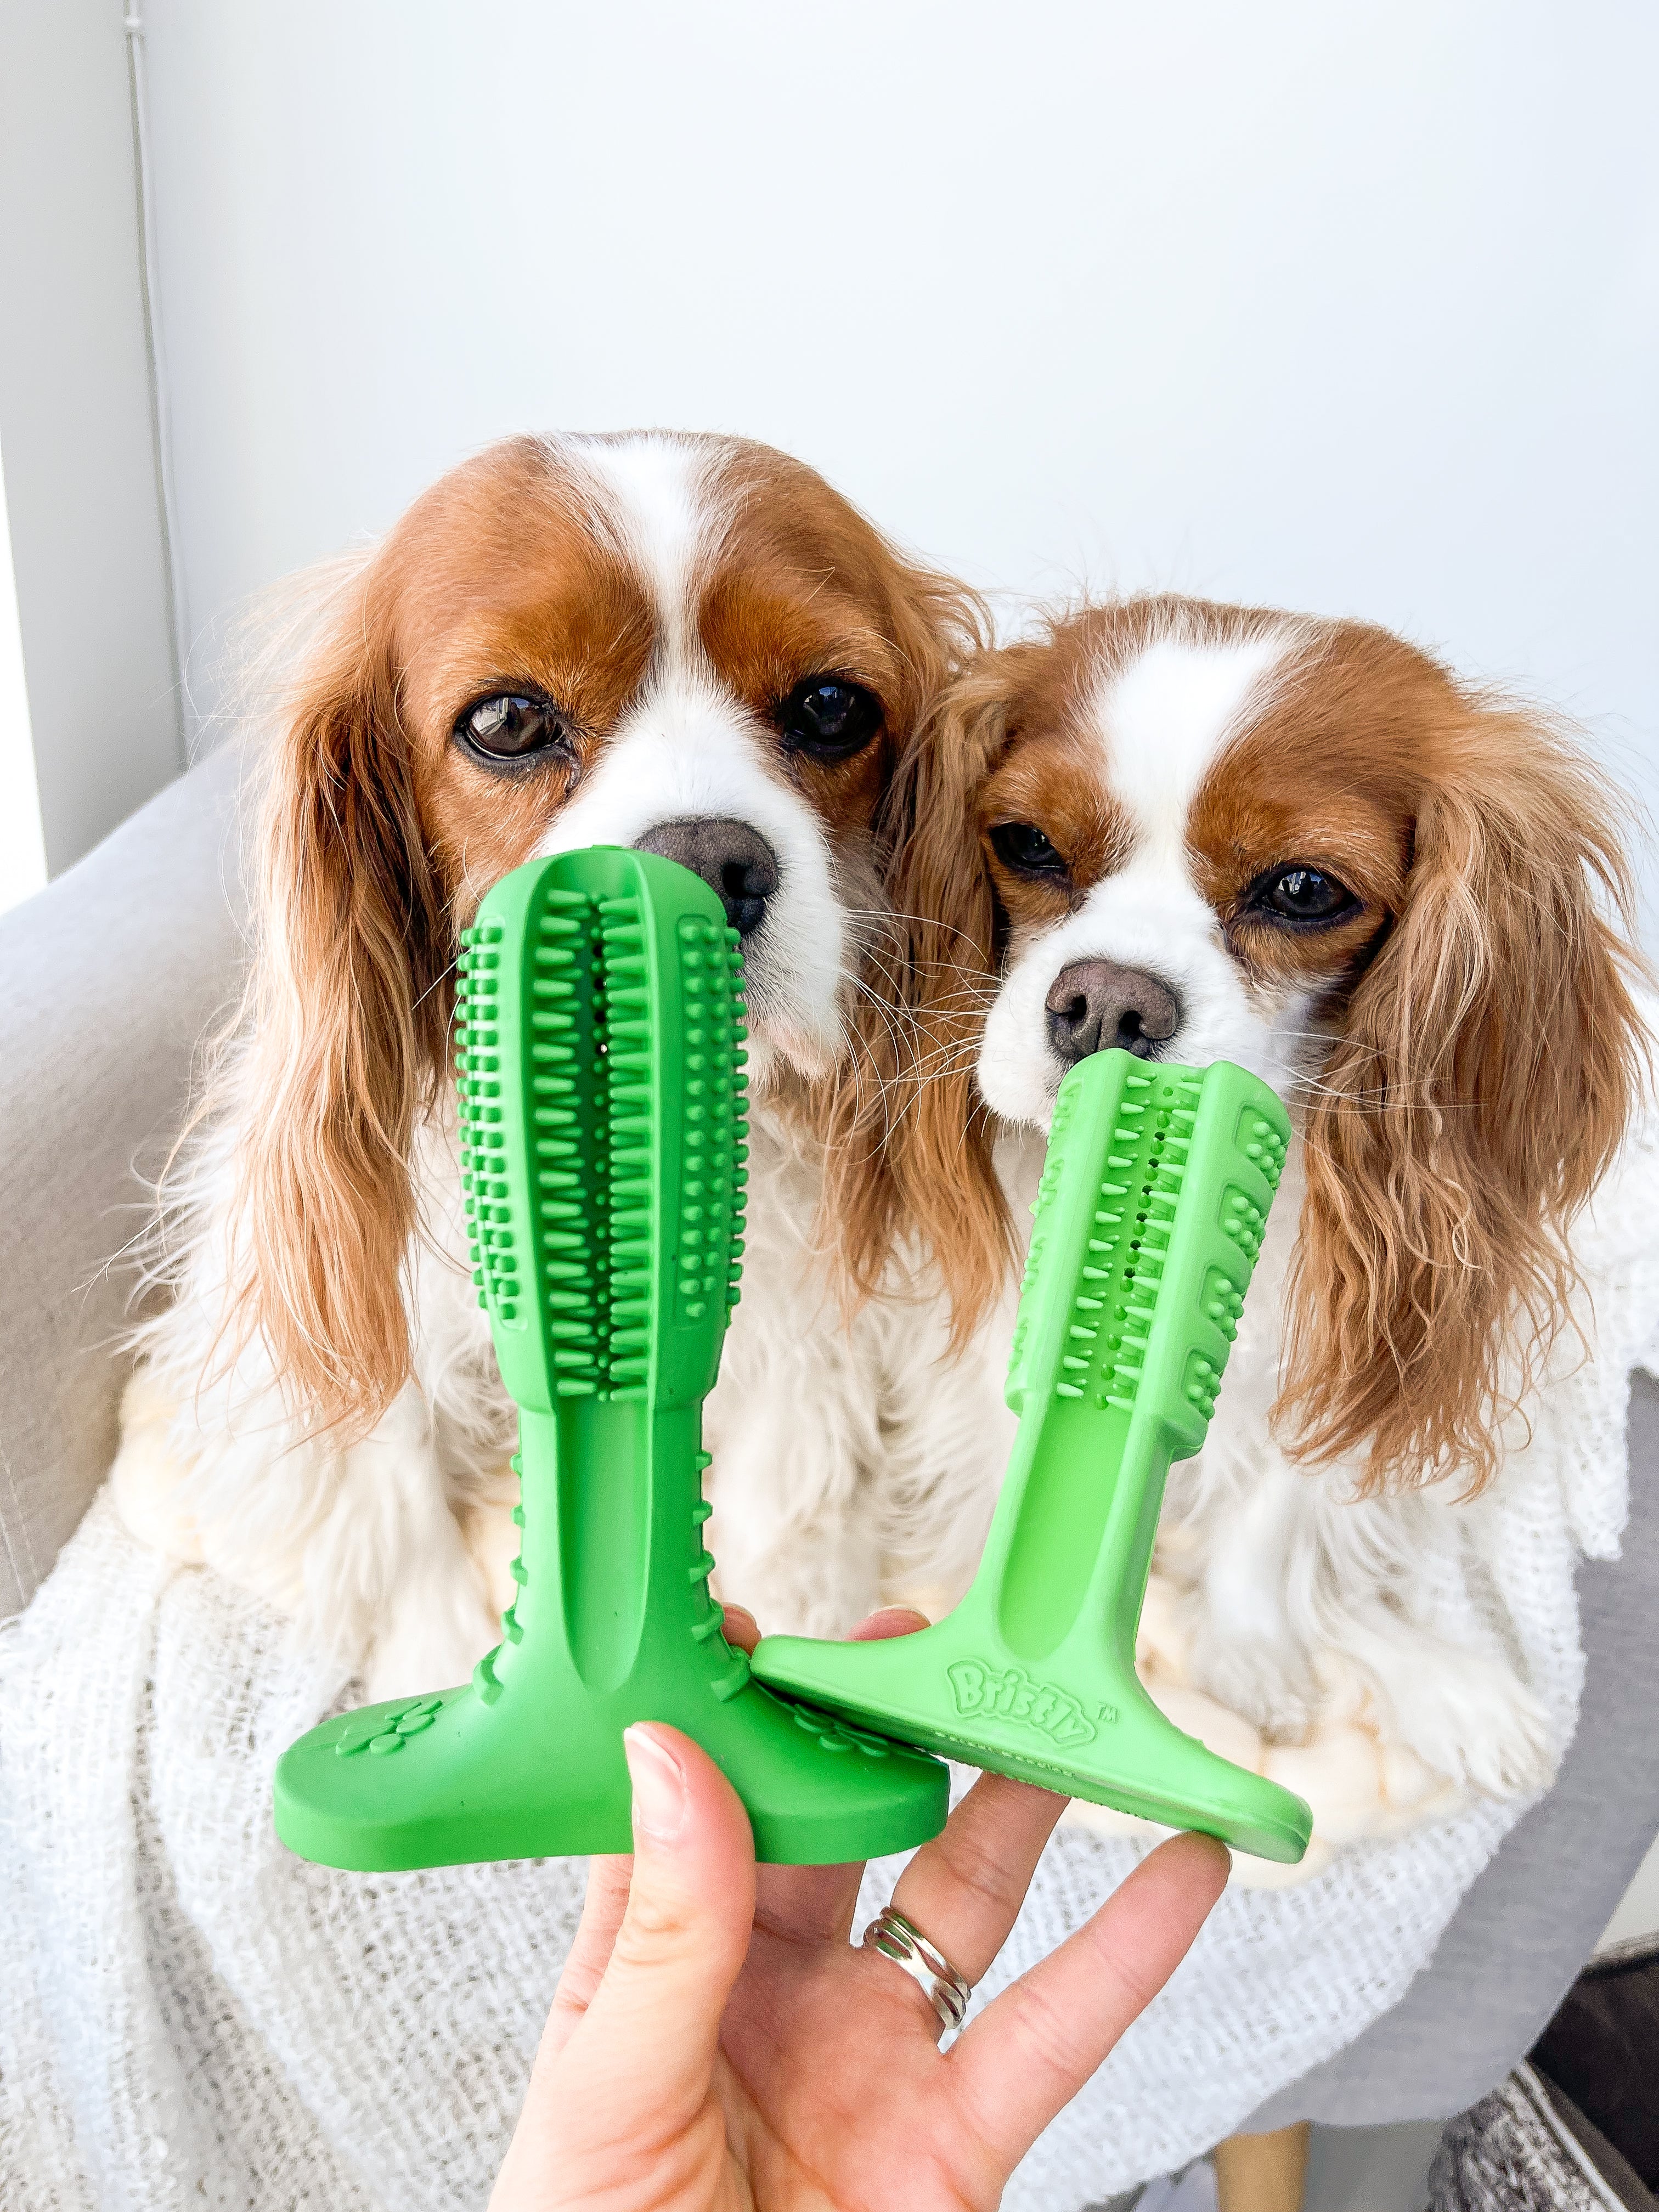 Does this work? Reviewing the Bristly dog toothbrush